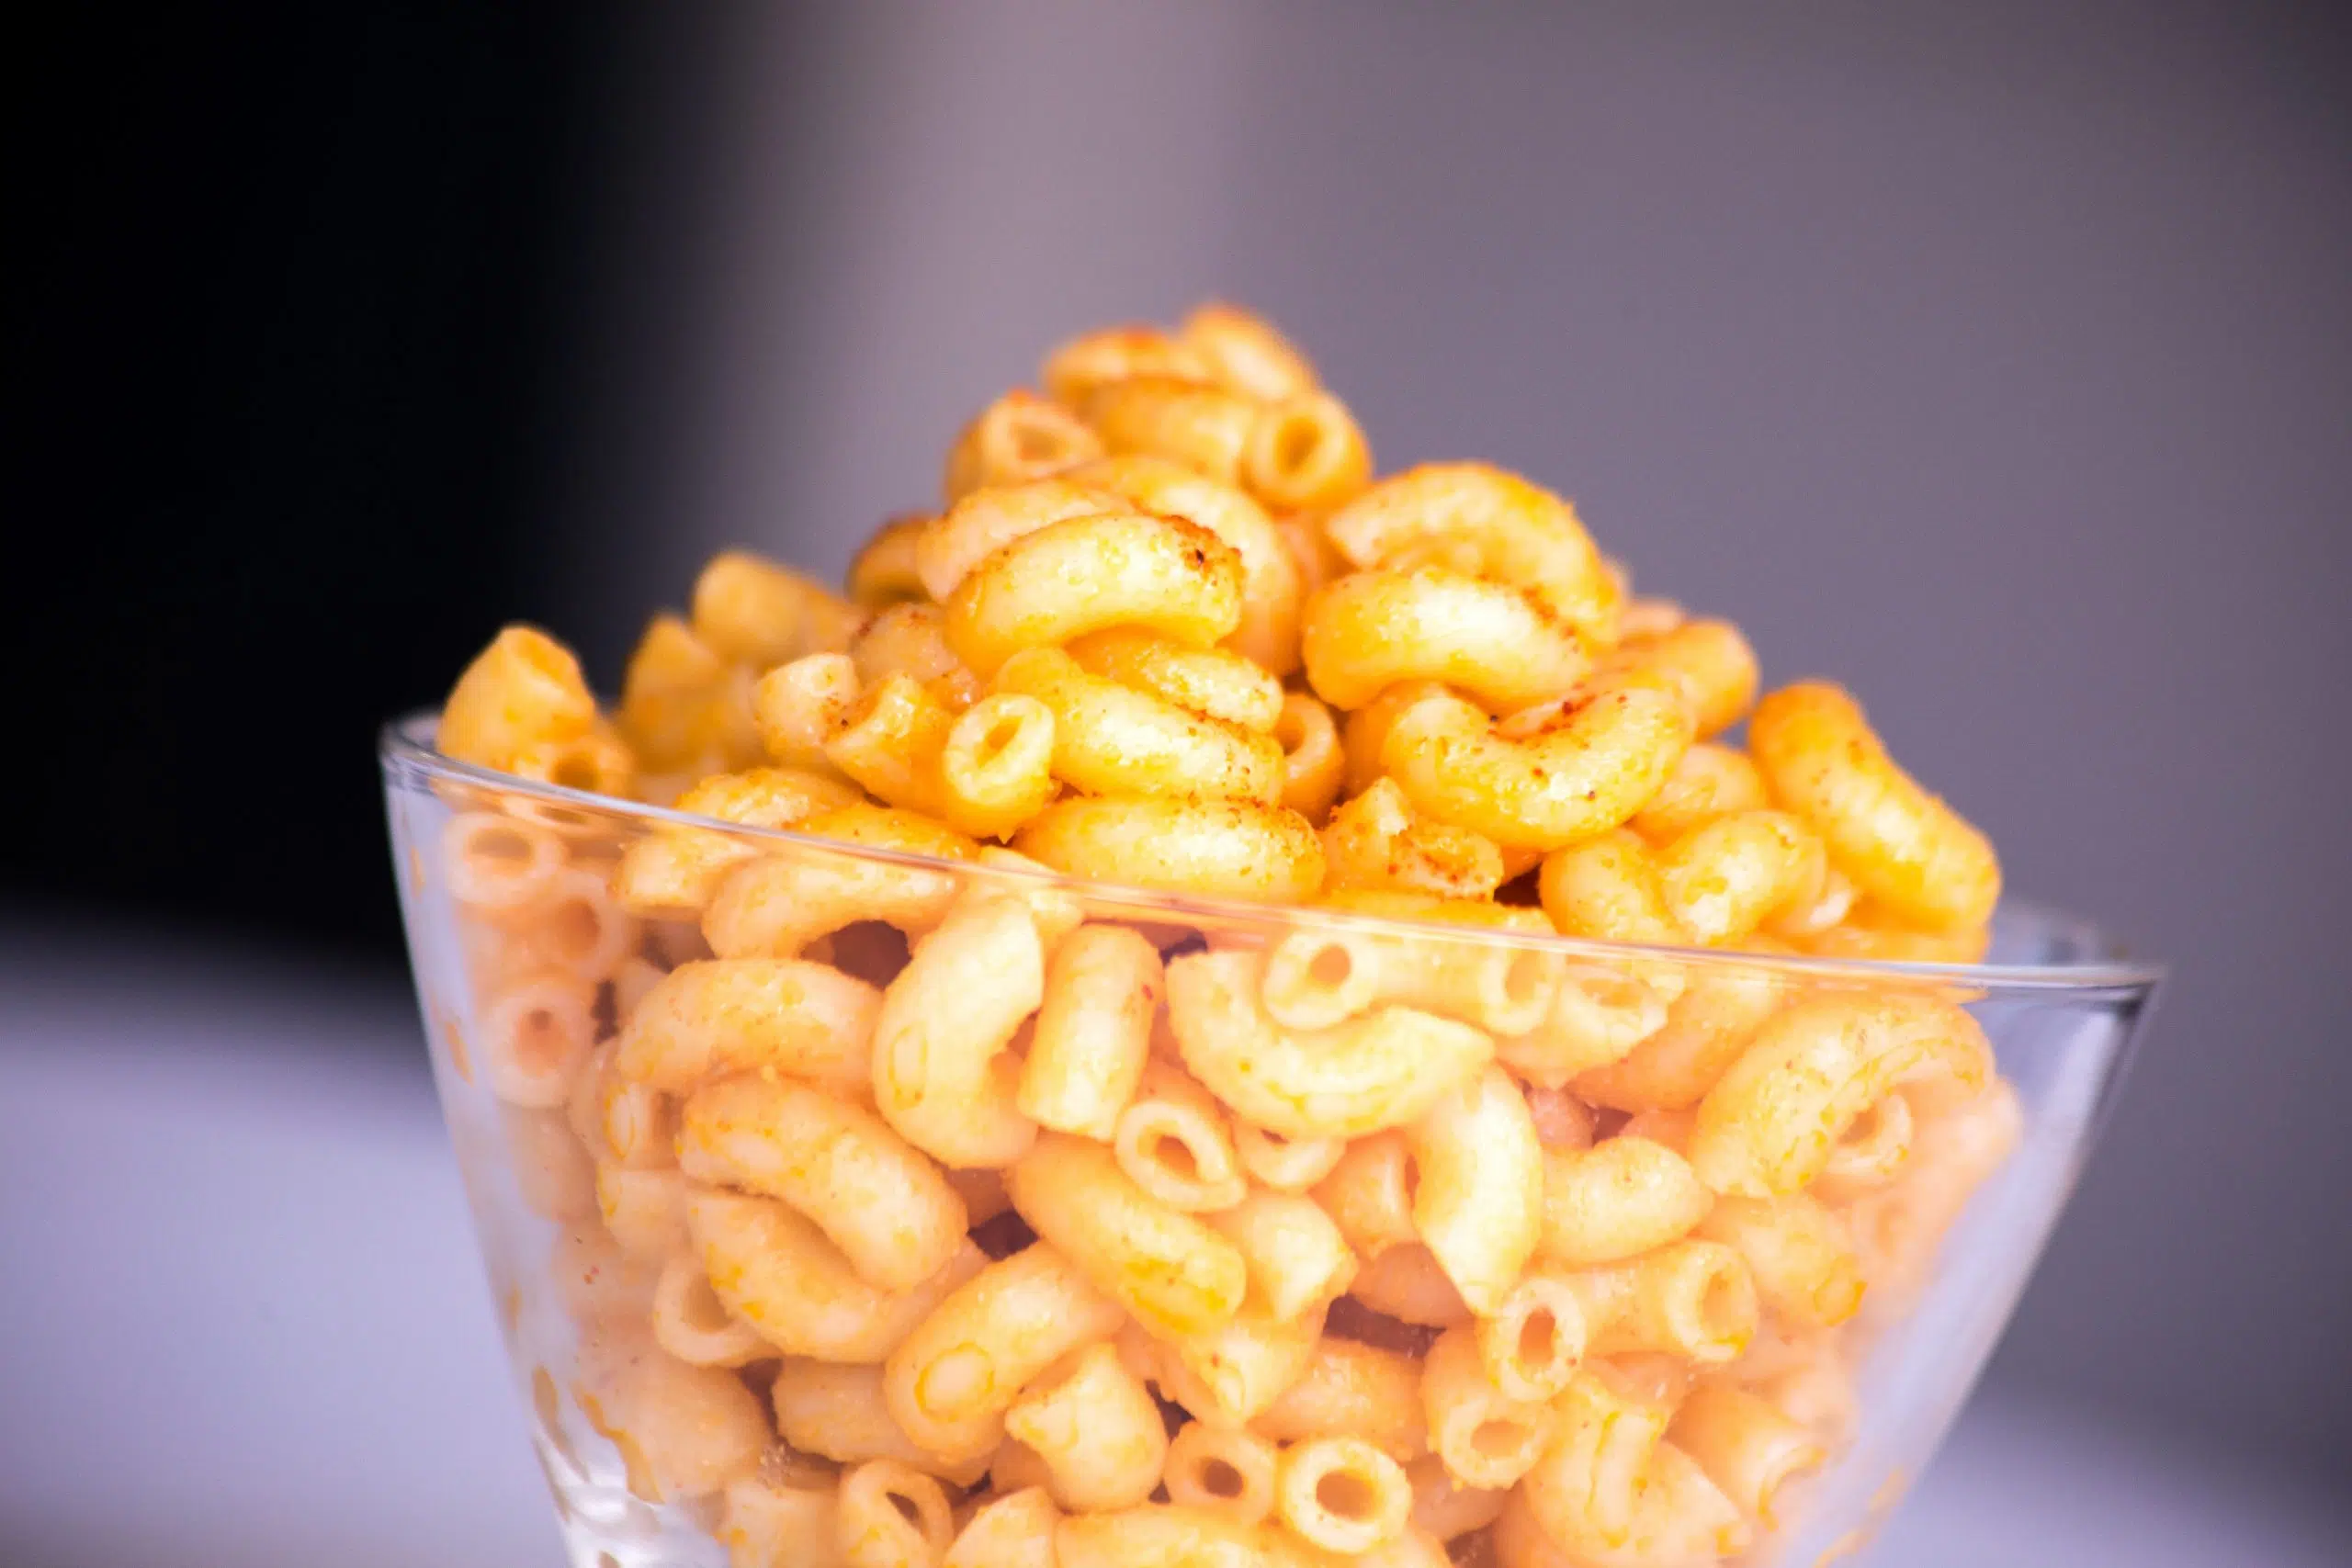 Today is National Macaroni and Cheese Day in America's Dairyland